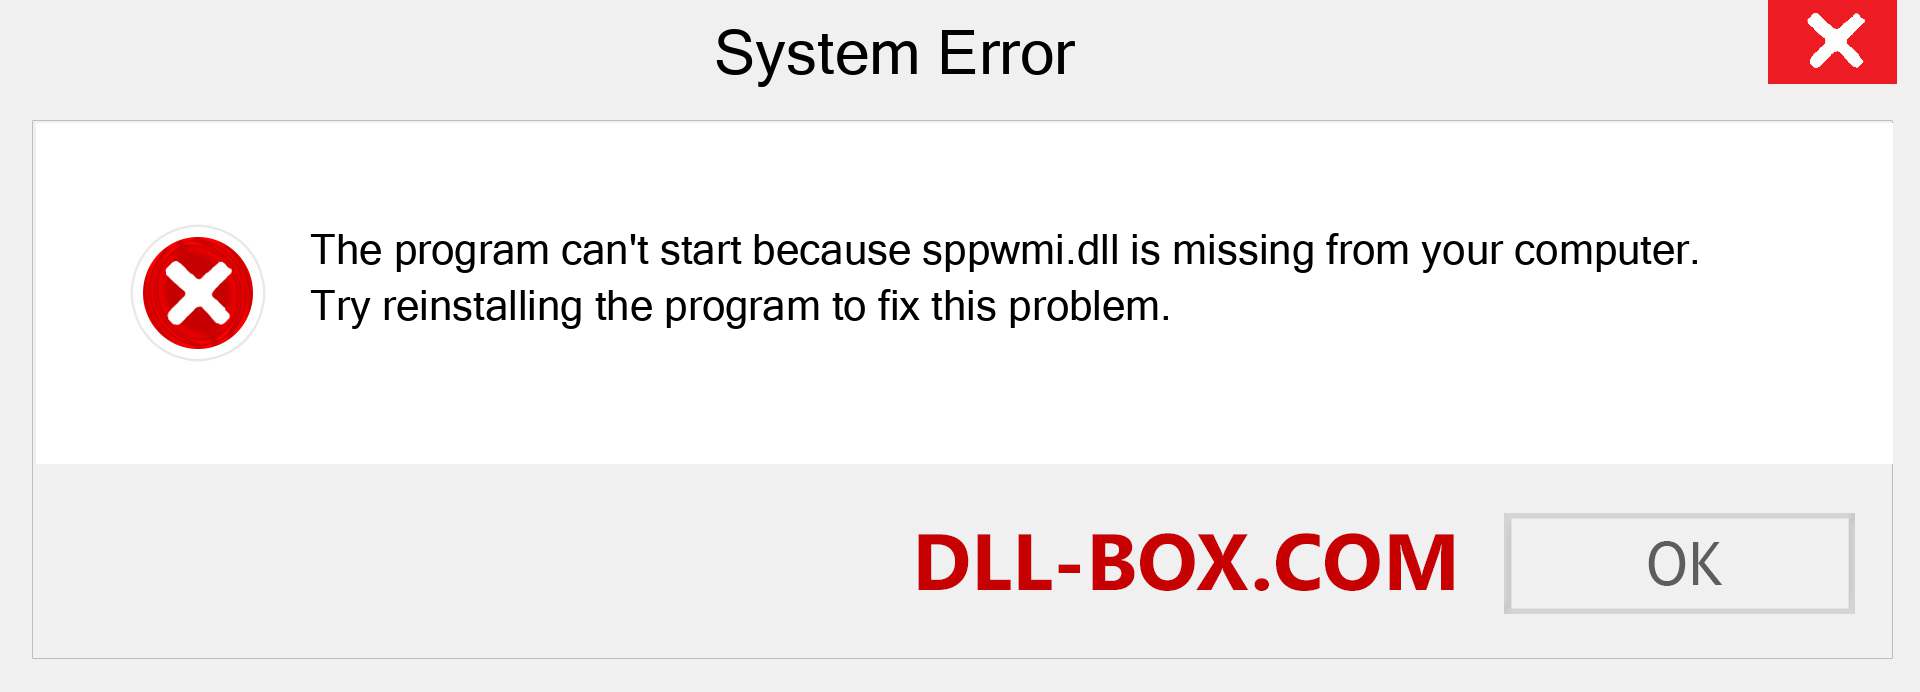  sppwmi.dll file is missing?. Download for Windows 7, 8, 10 - Fix  sppwmi dll Missing Error on Windows, photos, images